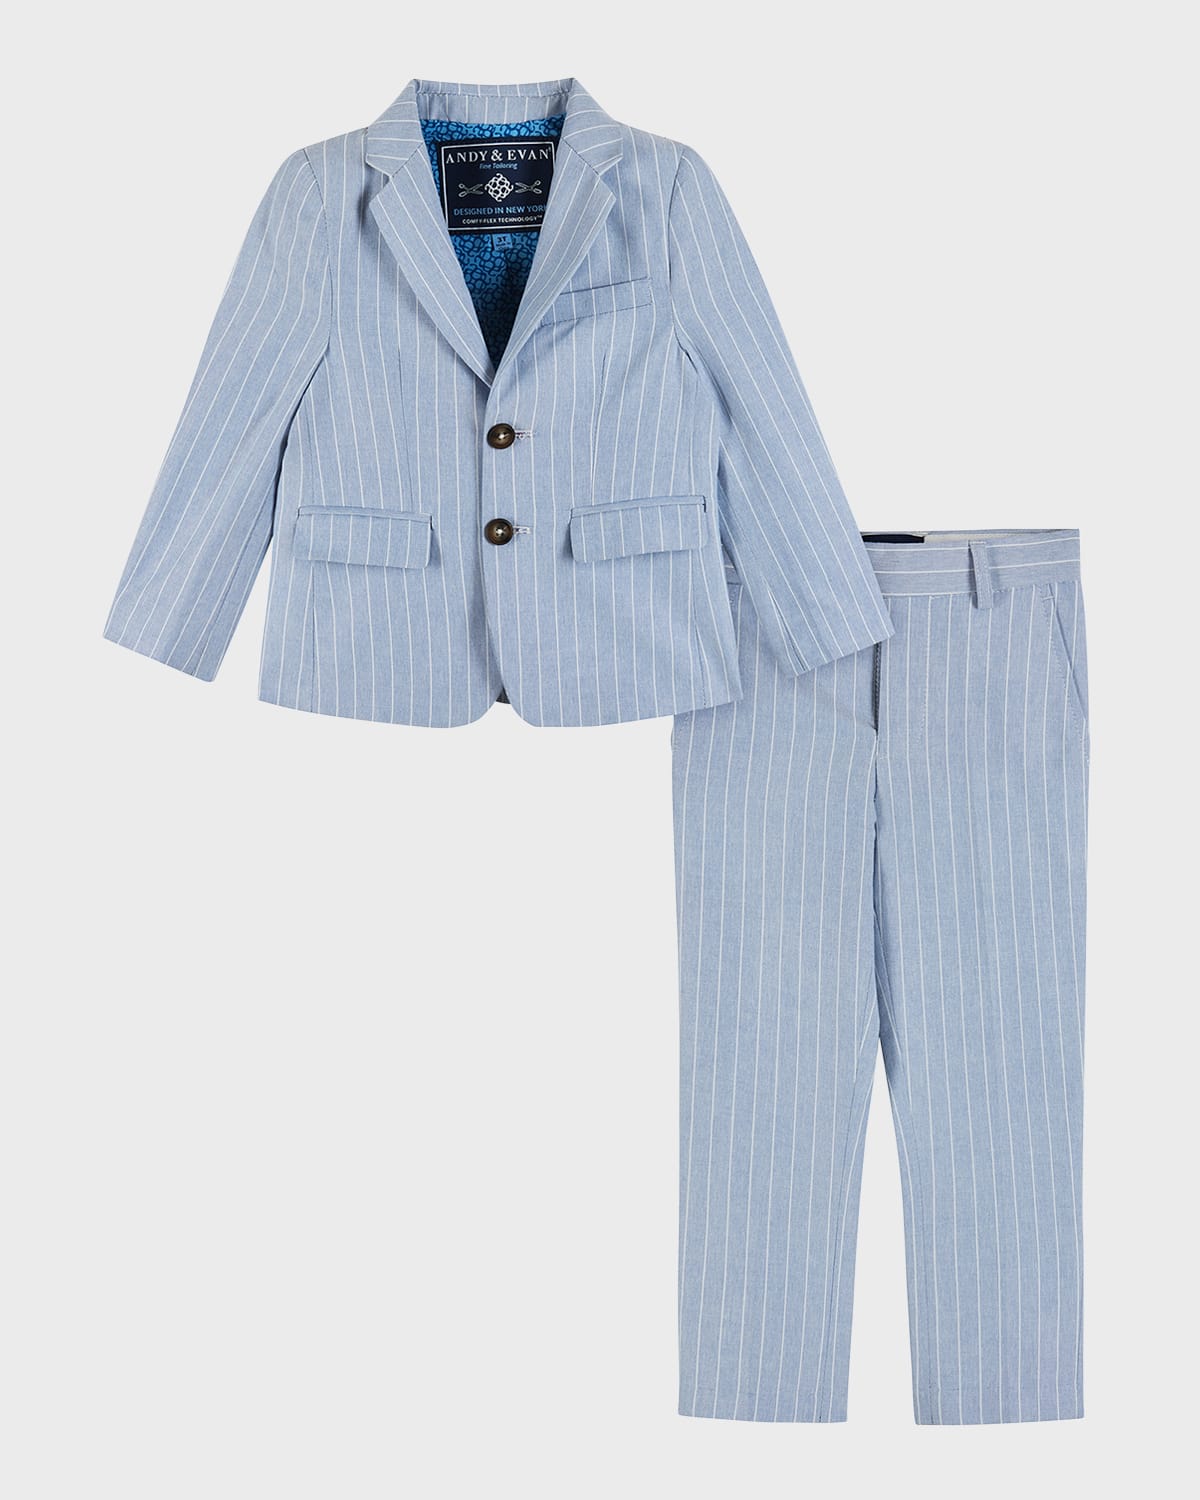 Andy & Evan Kids' Boy's Two-piece Suit Set In Chambray